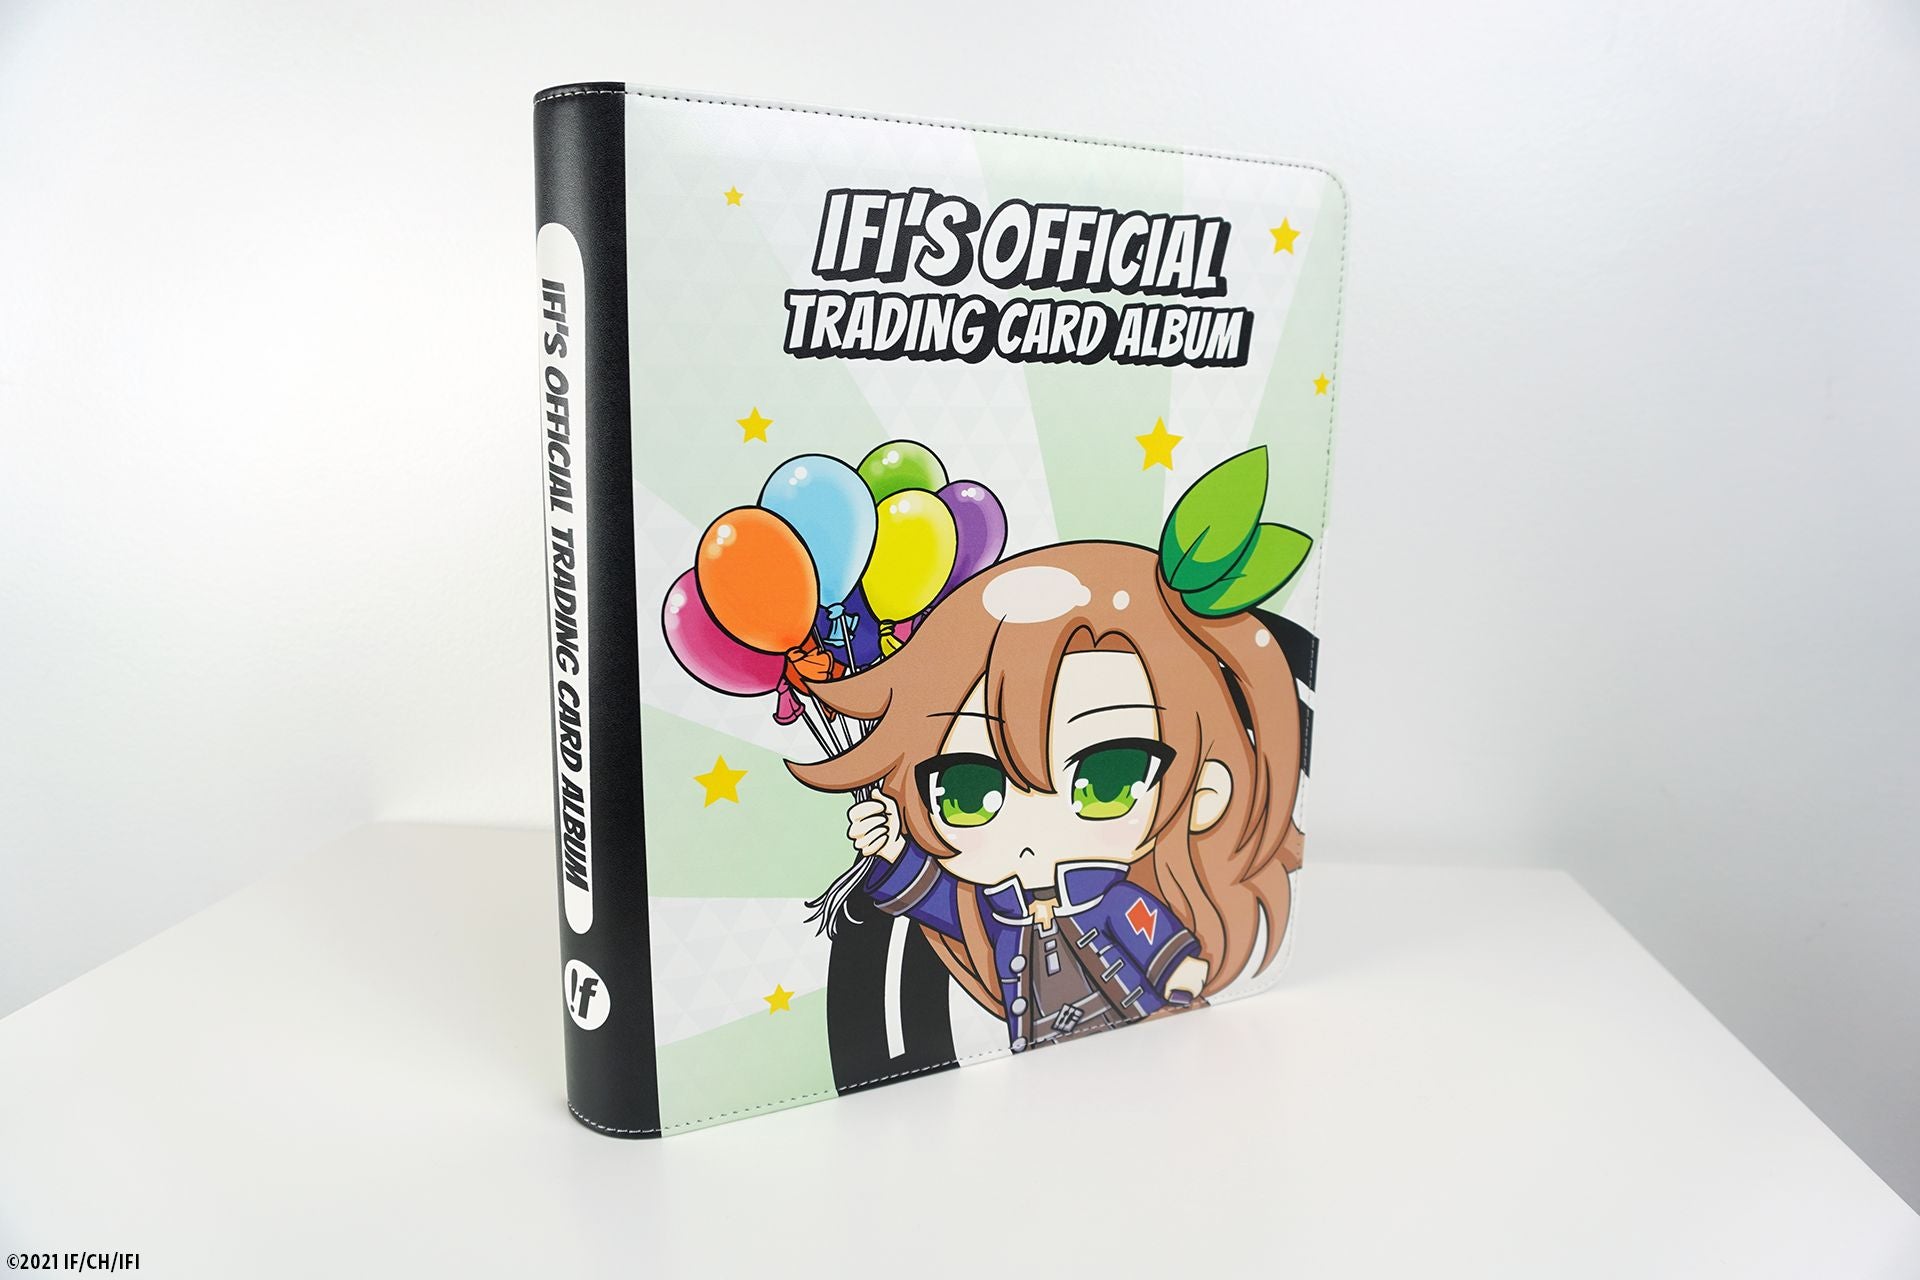 IFI's Official Trading Card Album